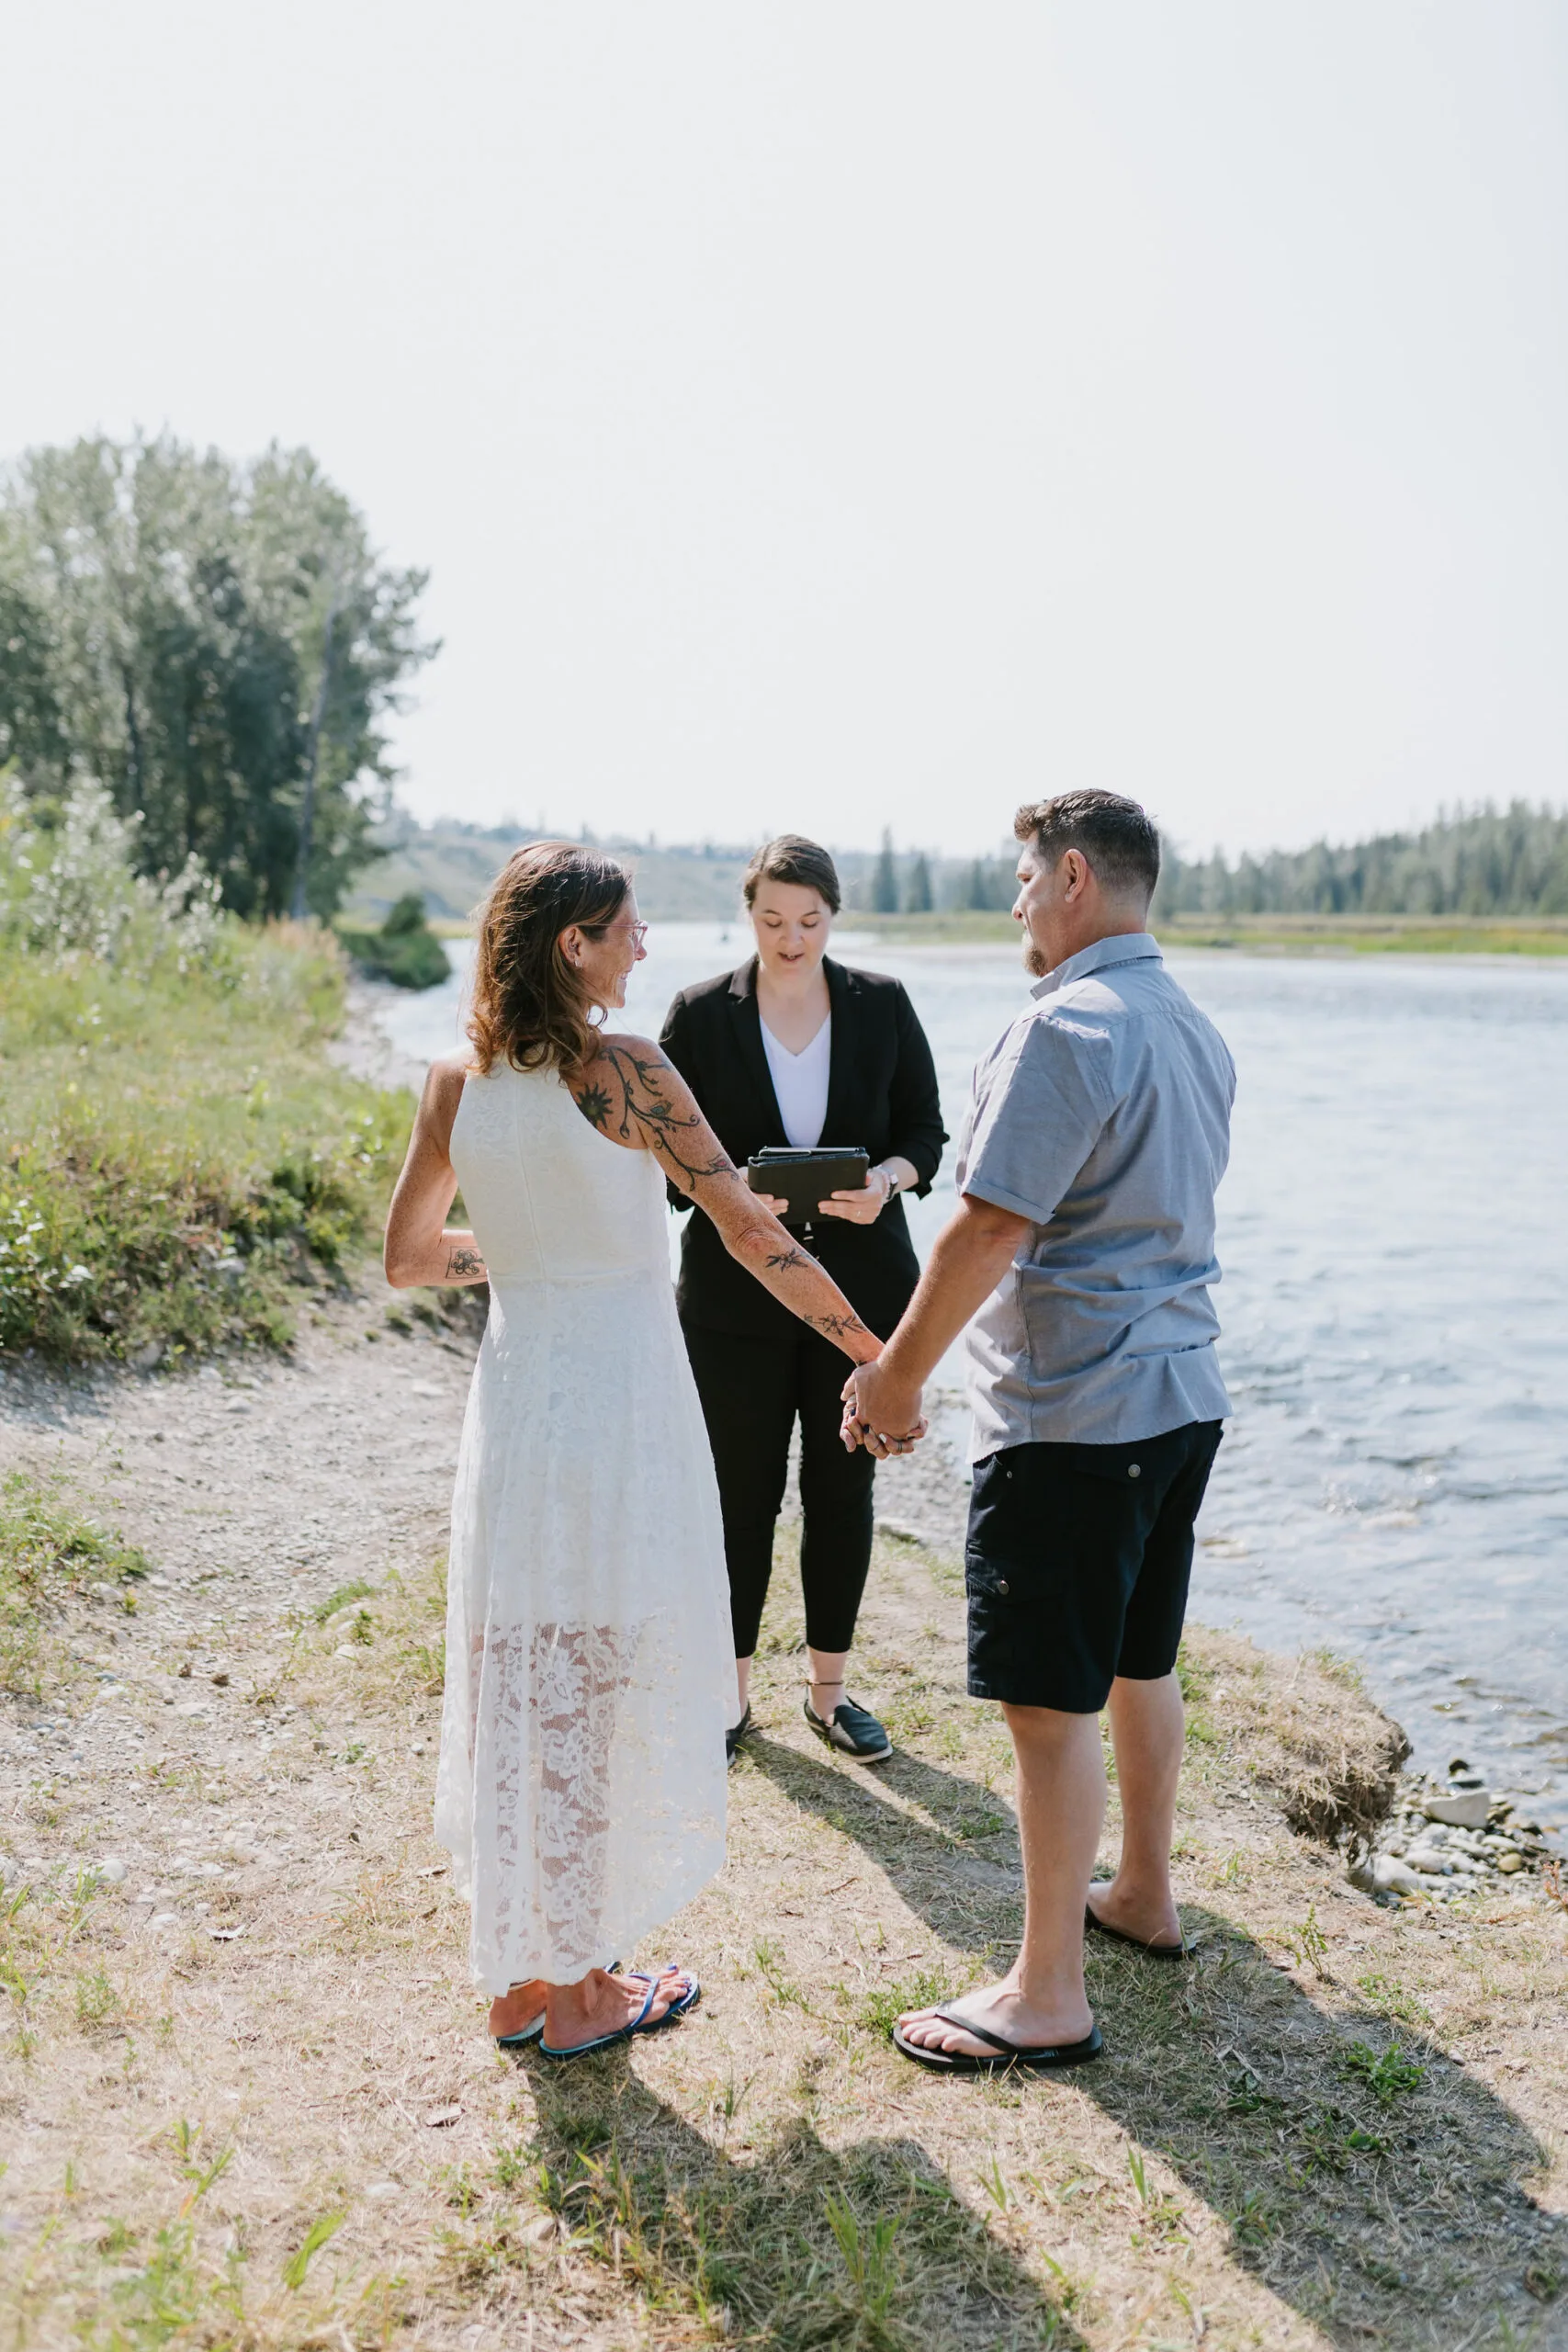 Marni and Tyler elopement at Fish Creek Park in Calgary with Young Hip & Married